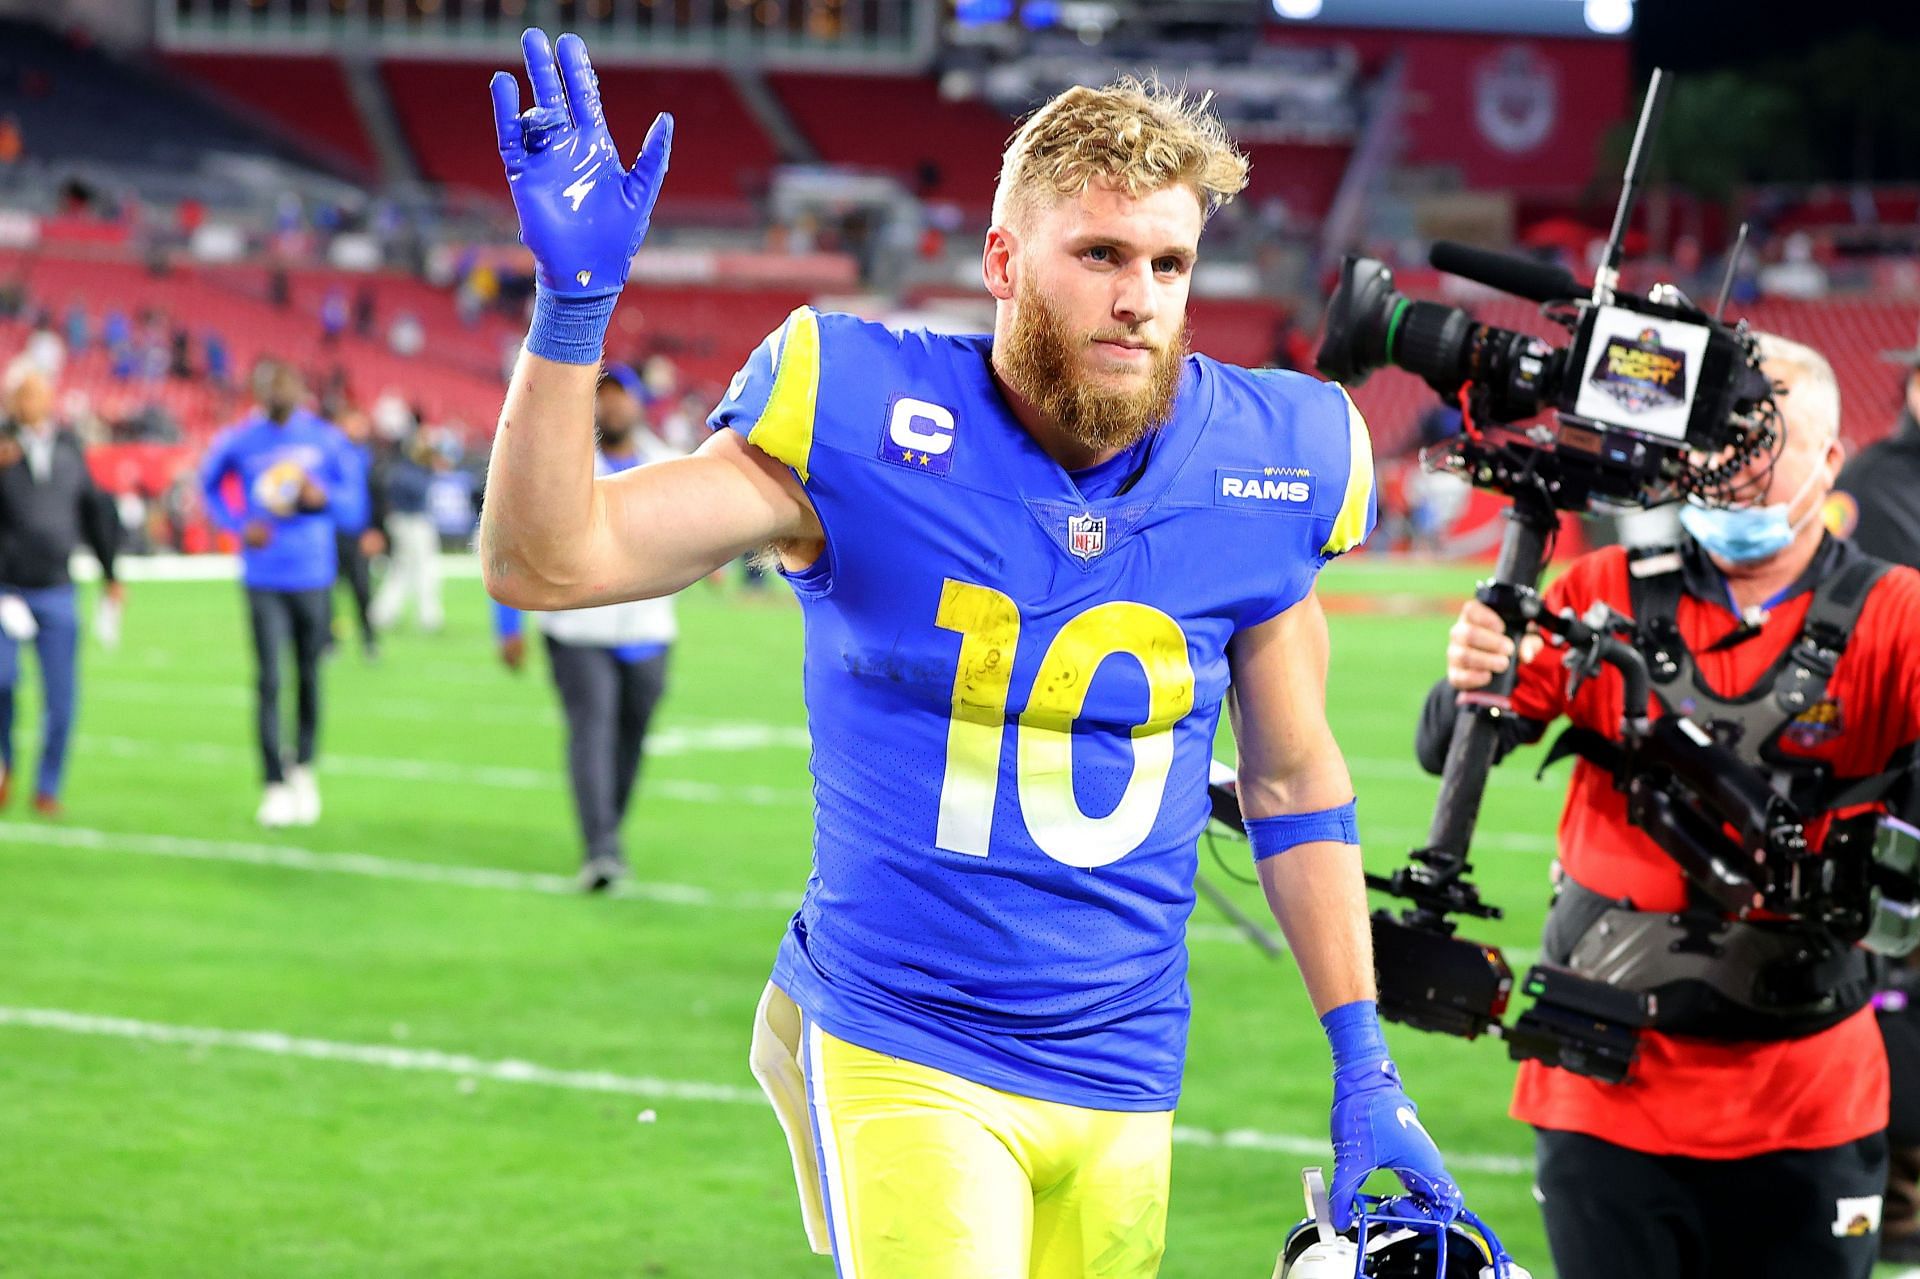 McVay: Rams WR Kupp probably out for rest of season